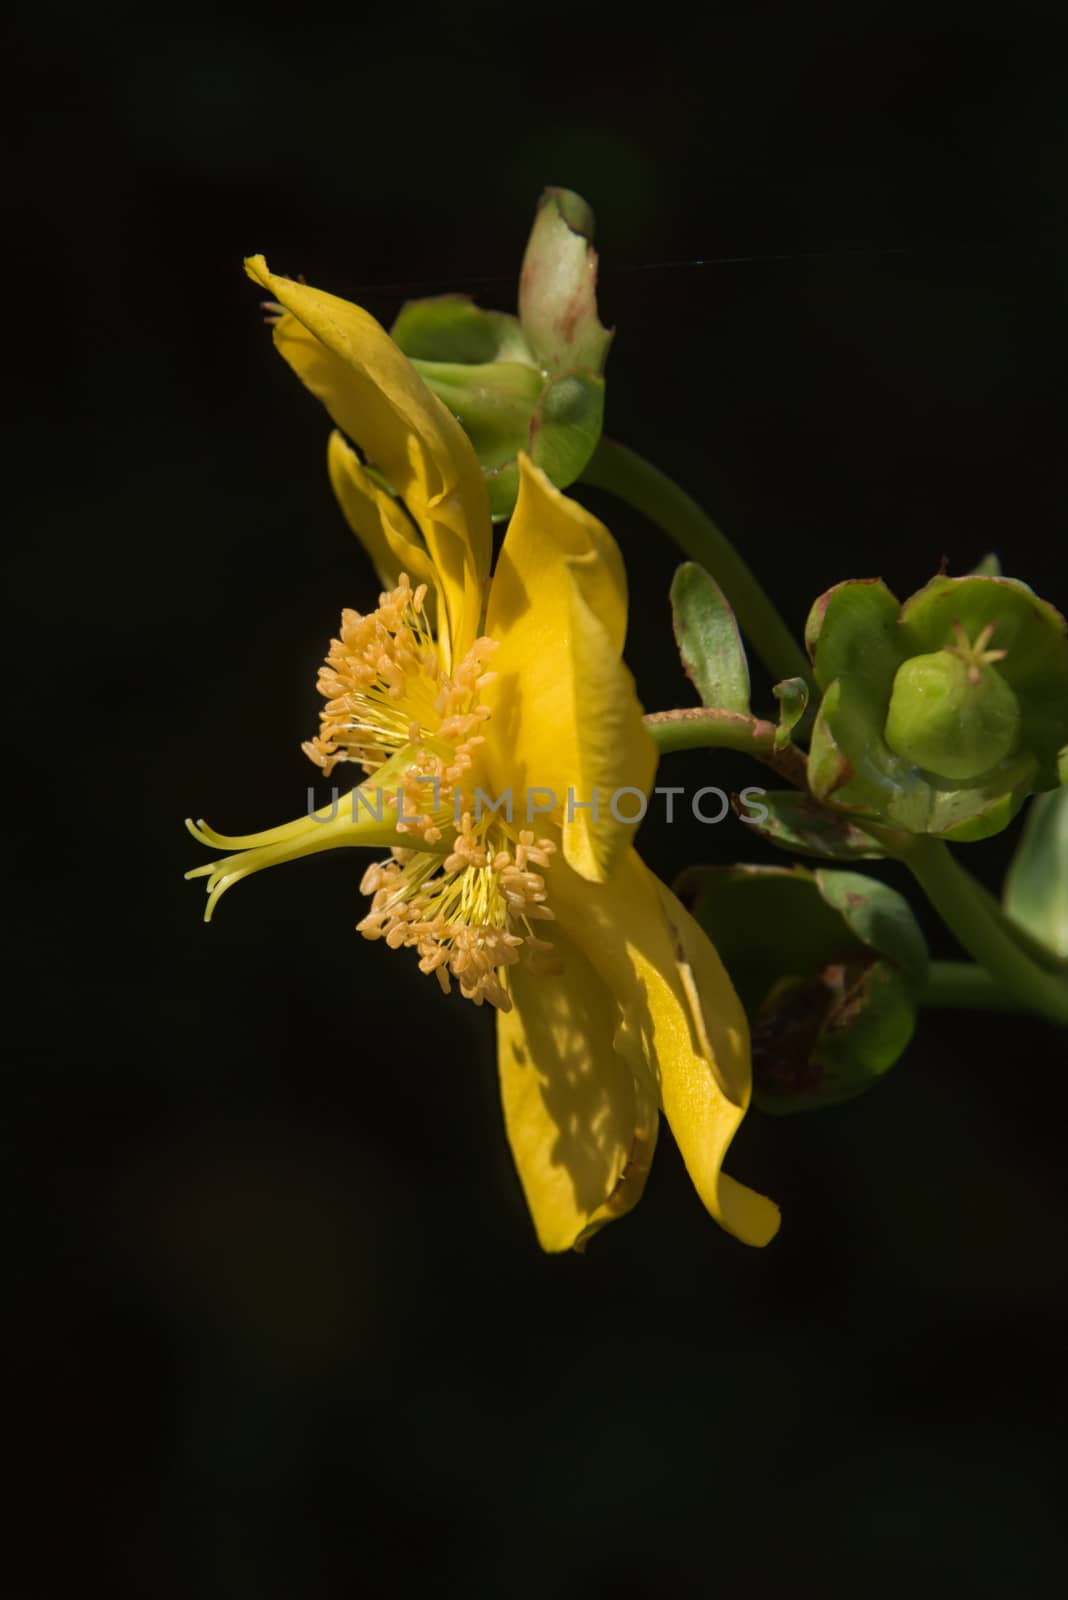 A side profile view of a single yellow hypericum flower against a black background in upright format